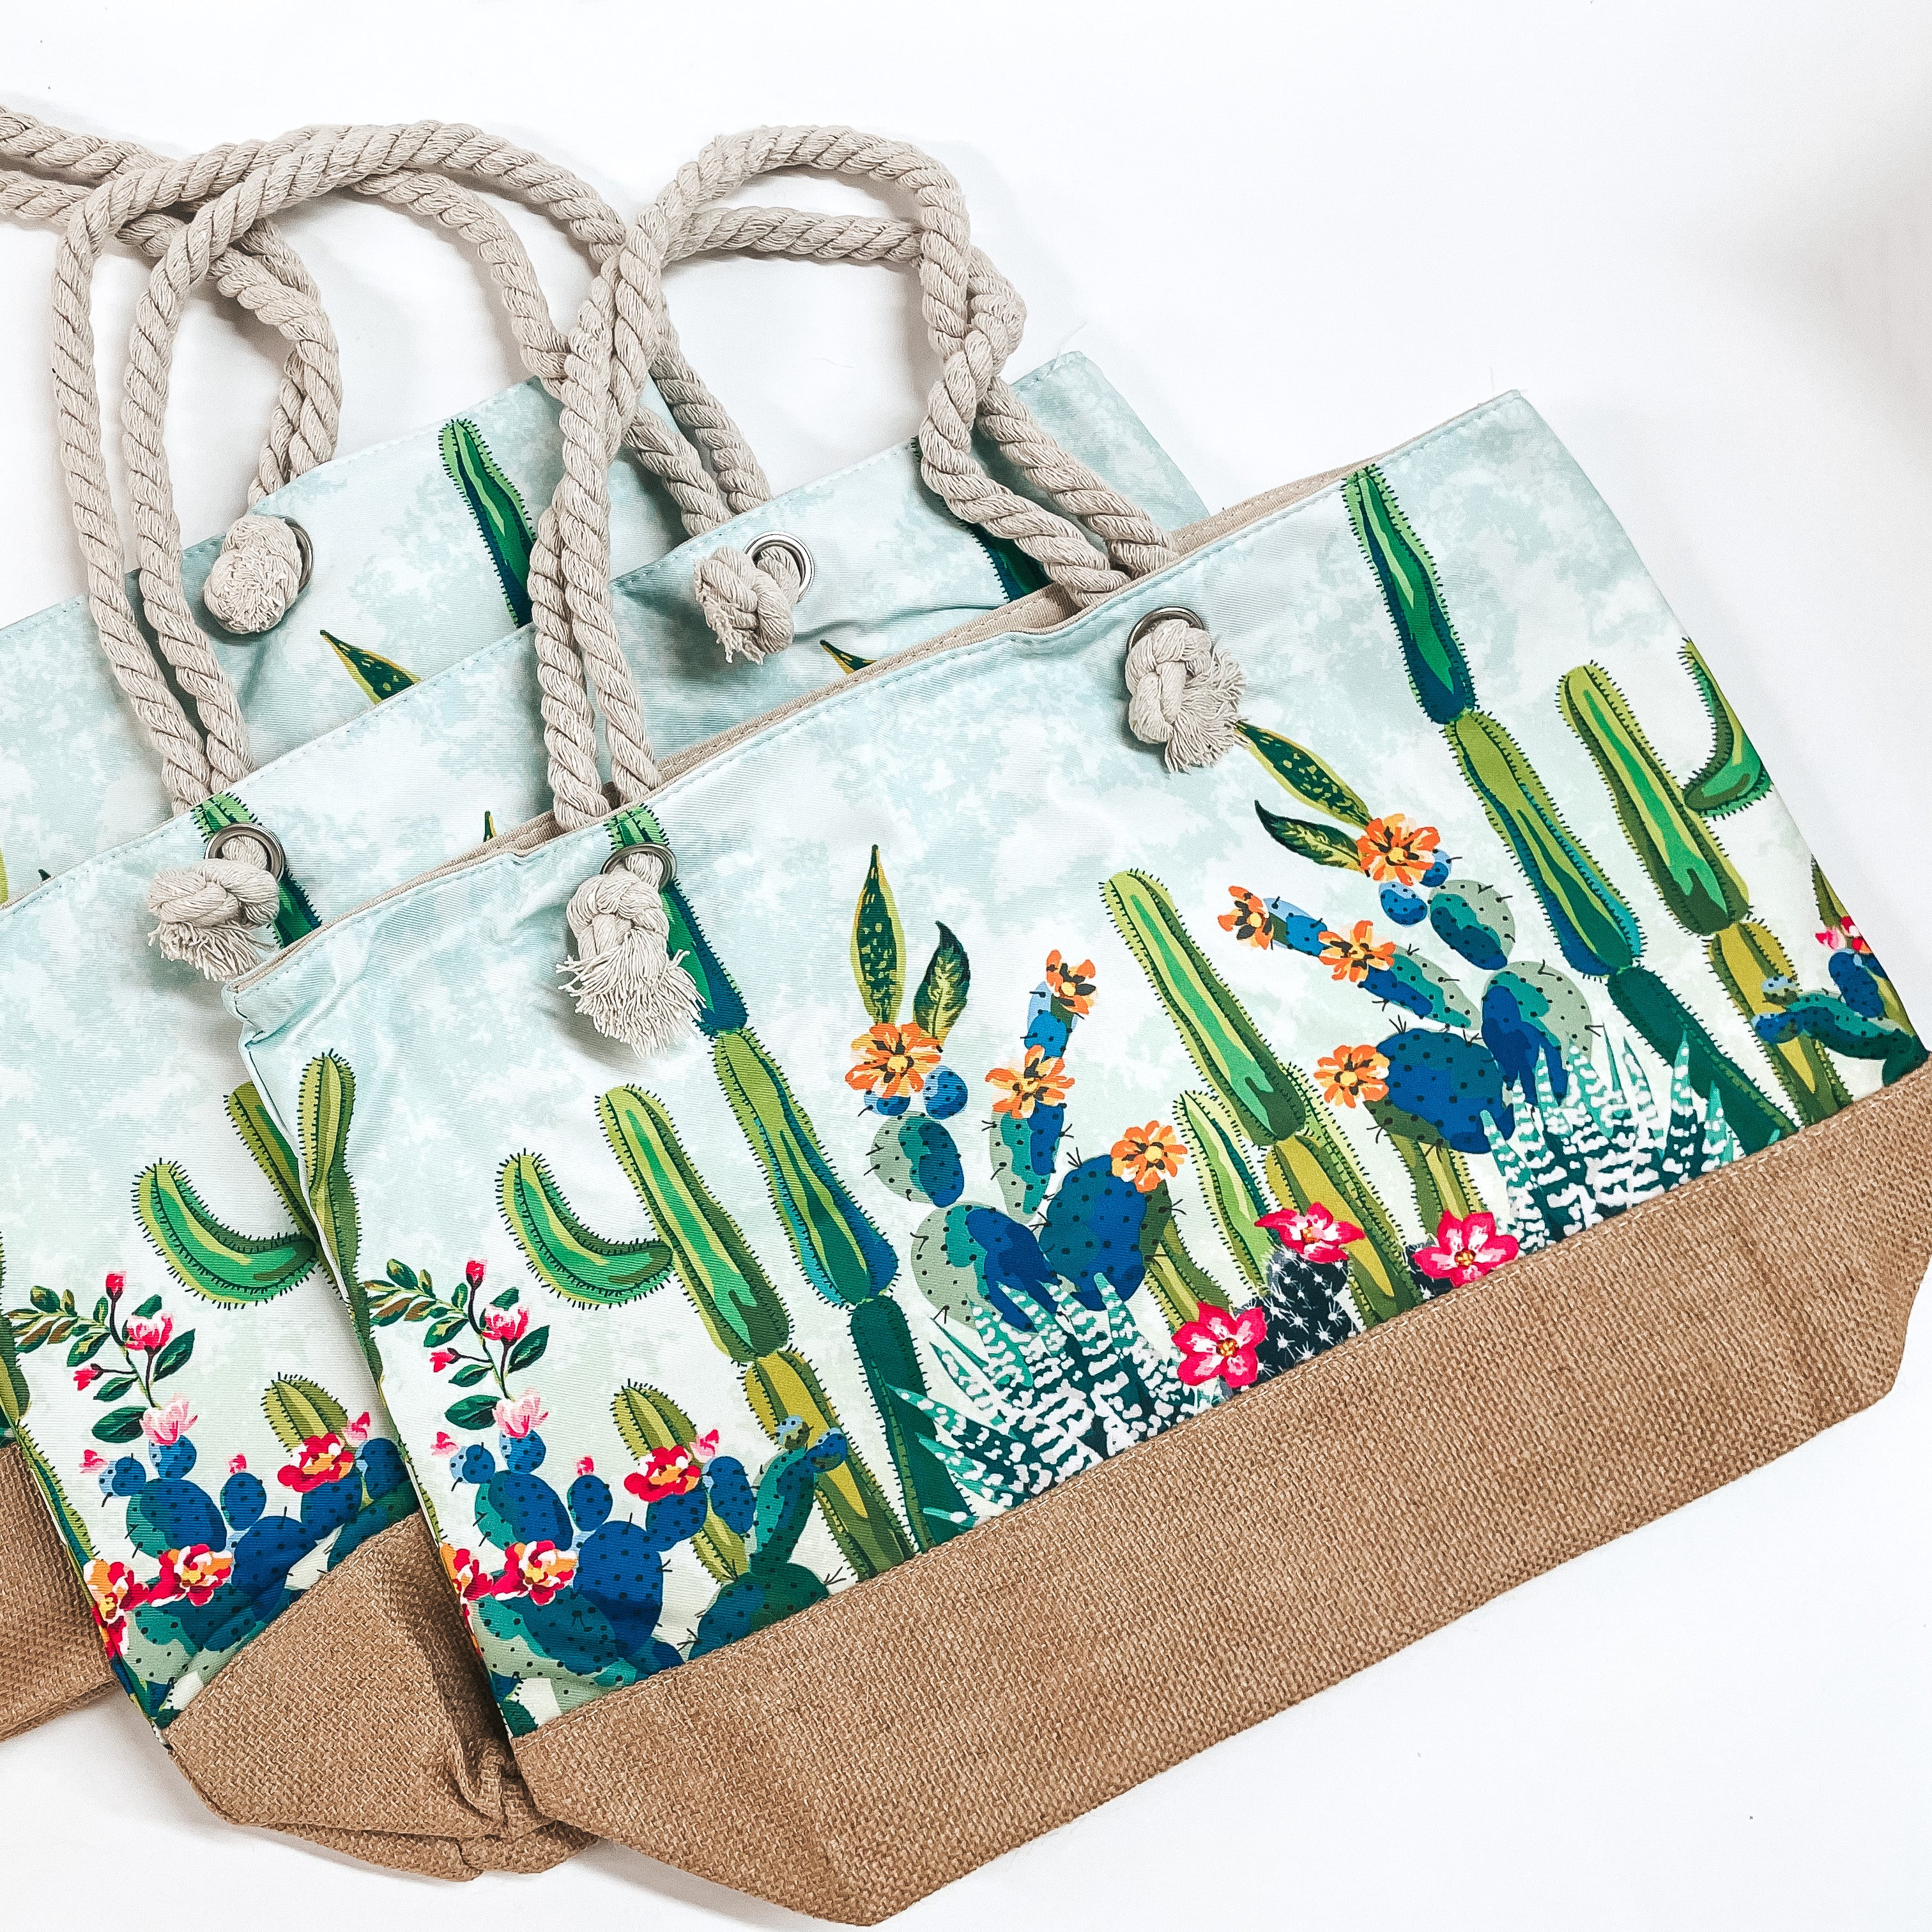 Cute Cactus Tote Bag with Canvas Detailing and Rope Handles - Giddy Up Glamour Boutique